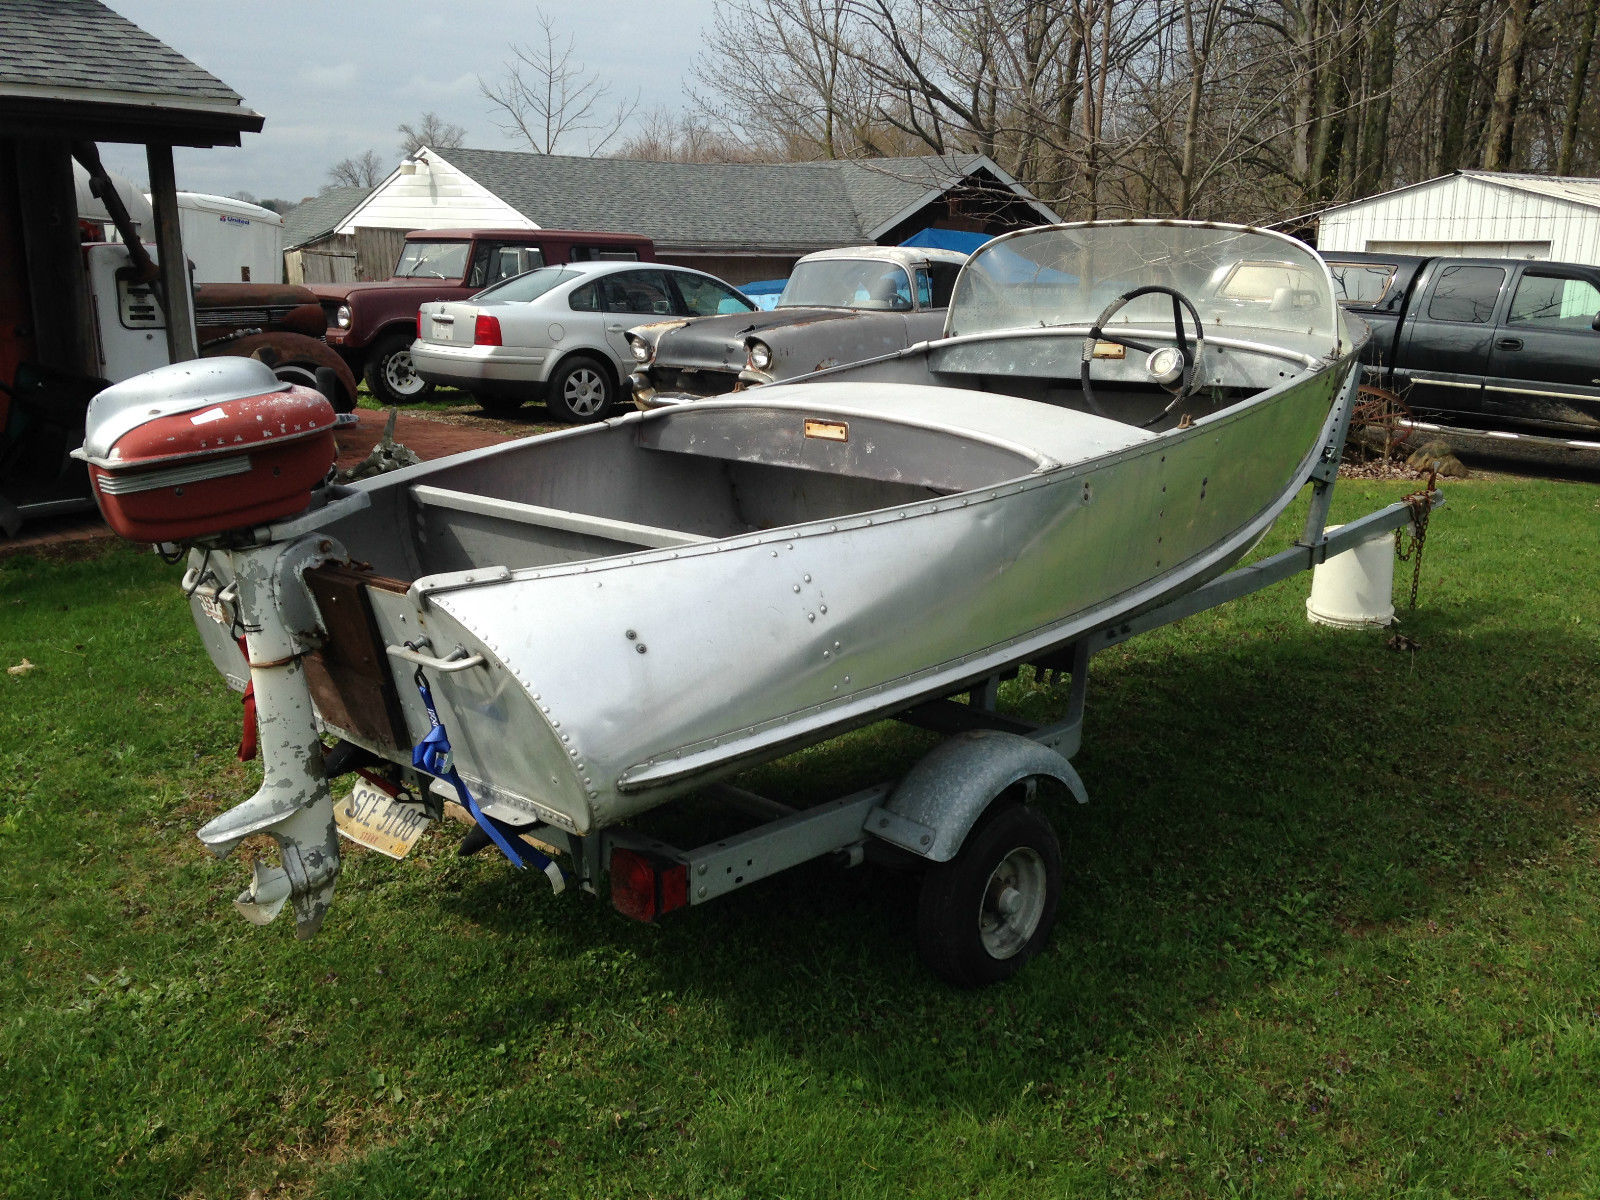 Feather Craft Deluxe Runabout 1954 for sale for $200 ...